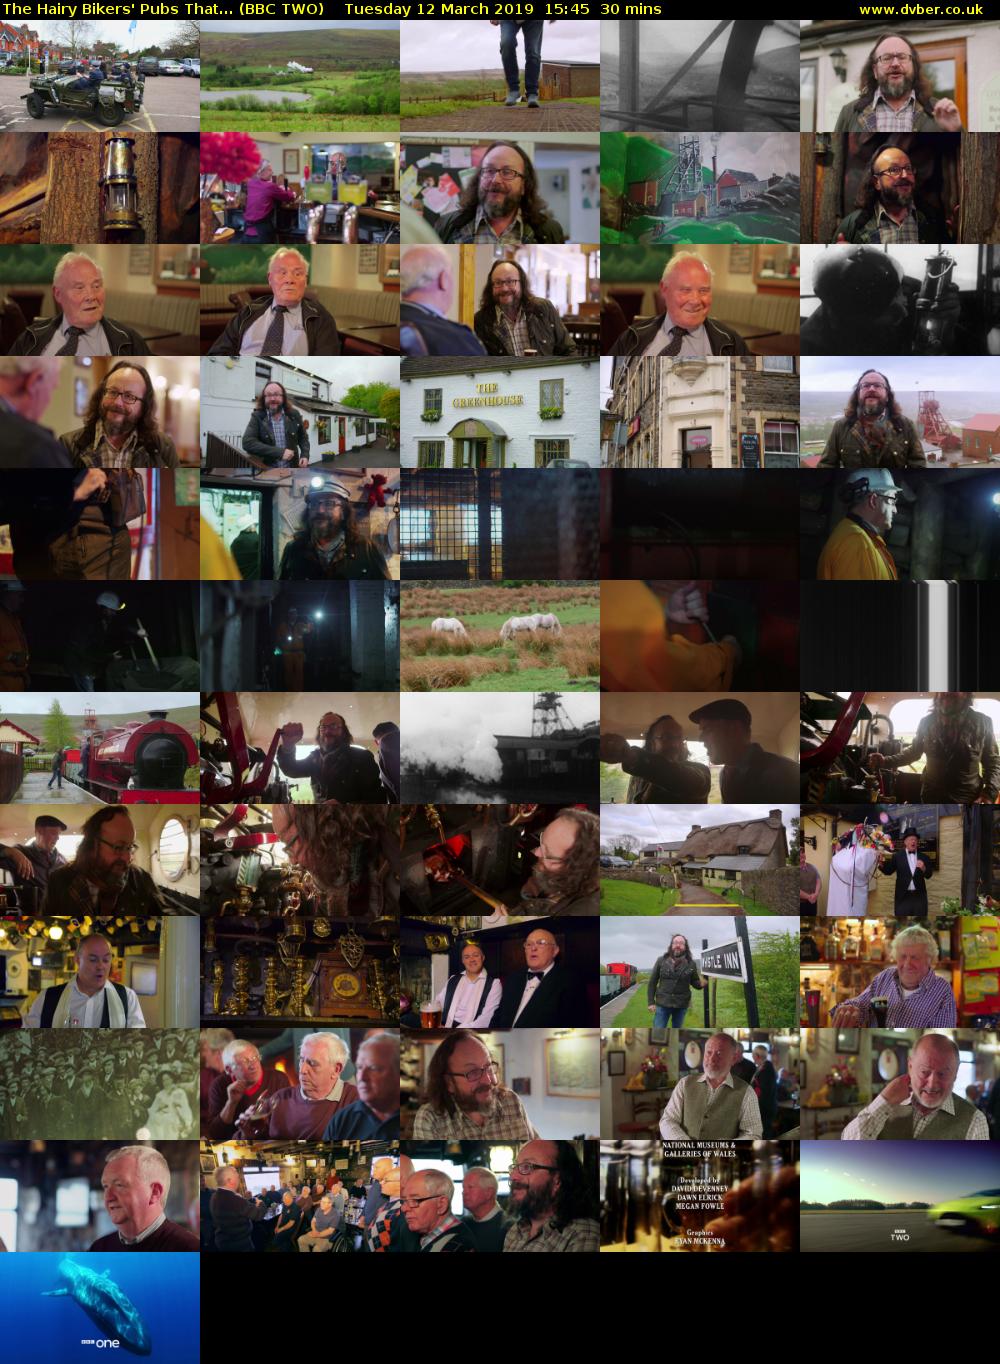 The Hairy Bikers' Pubs That... (BBC TWO) Tuesday 12 March 2019 15:45 - 16:15